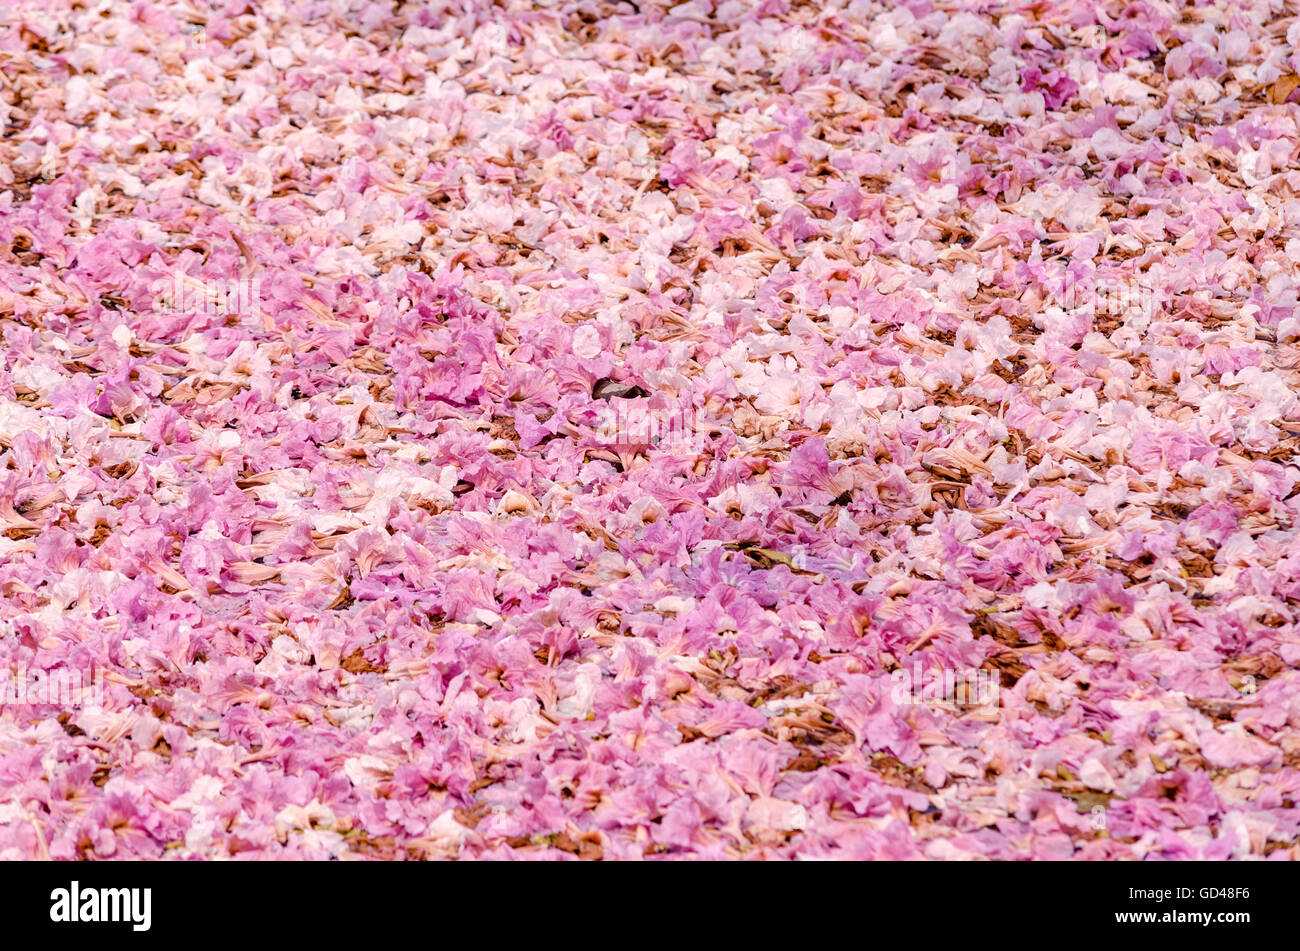 Texture of Tabebuia rosea on the ground, pink flower, fallen flower. Stock Photo